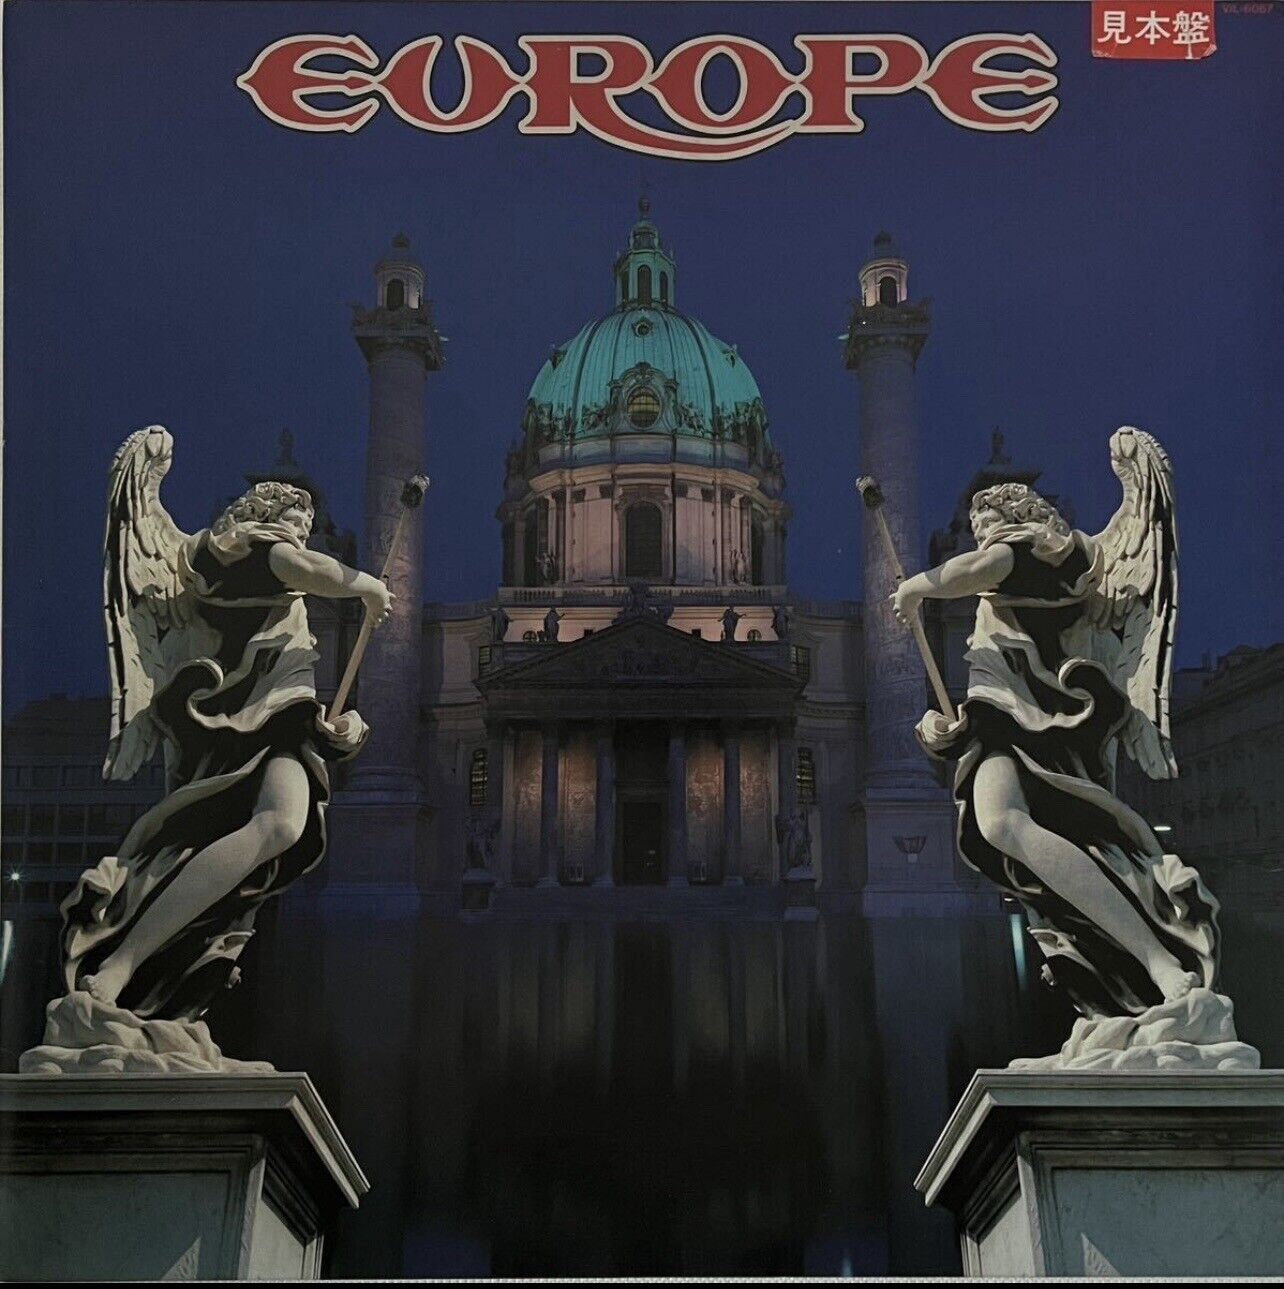 Europe by Europe (vinyl record, promotional copy, 1983) heavy metal, rare